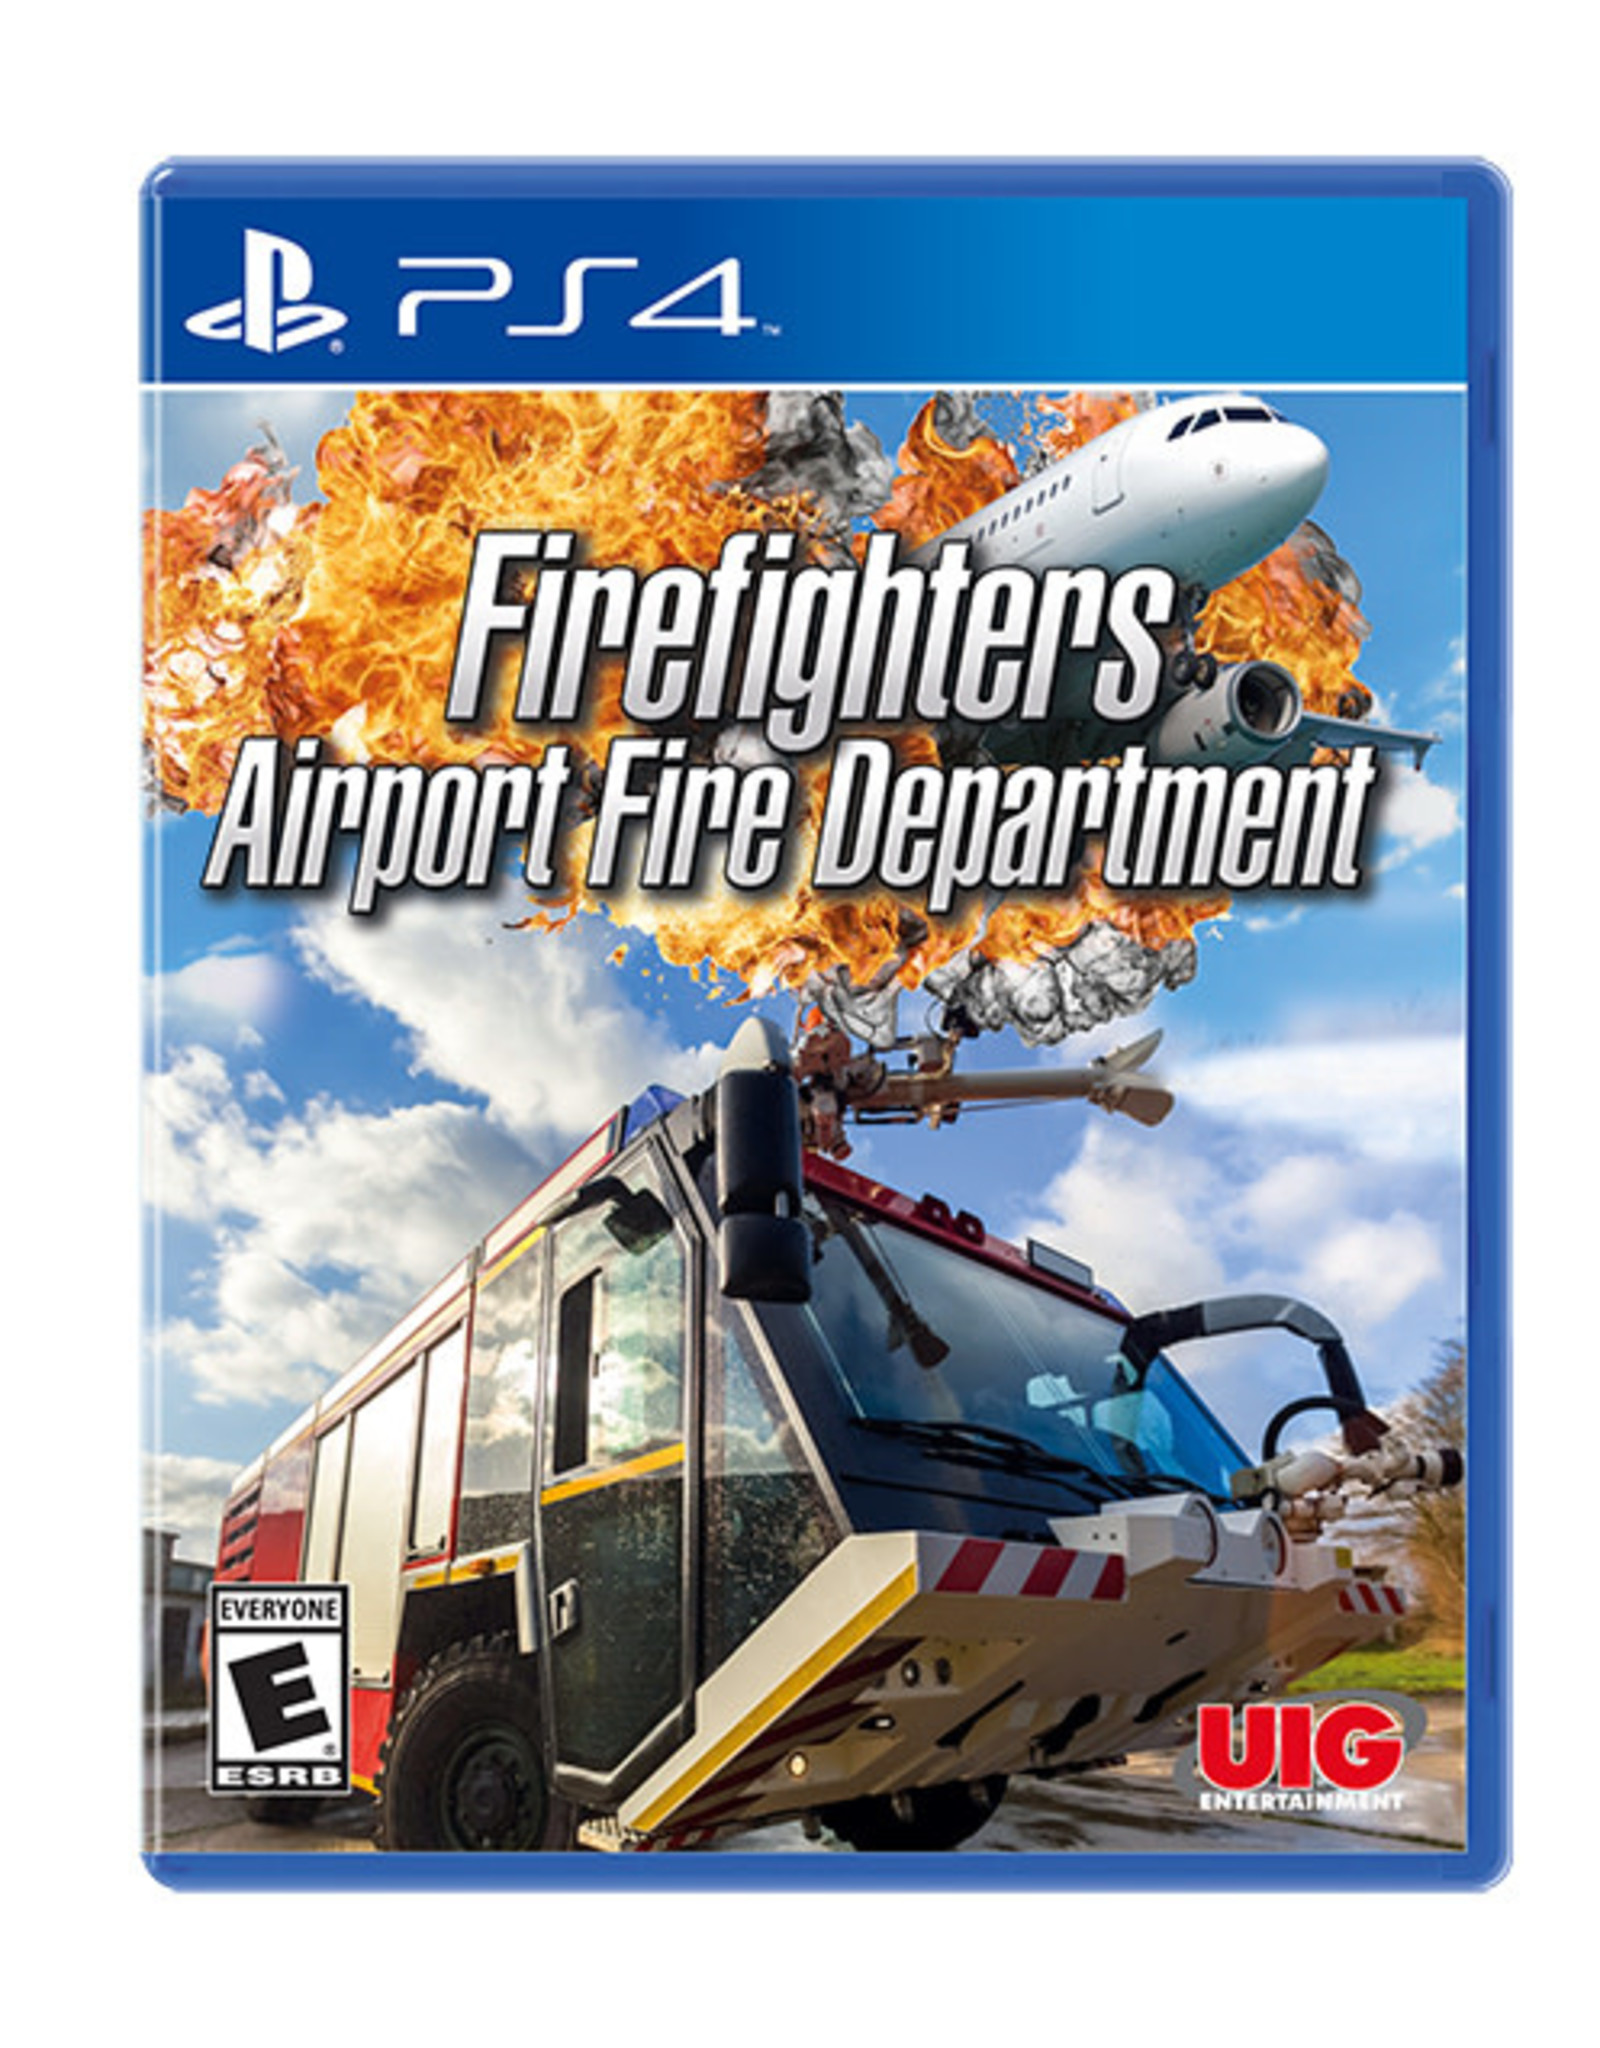 Playstation 4 Firefighters Airport Fire Department (CiB)